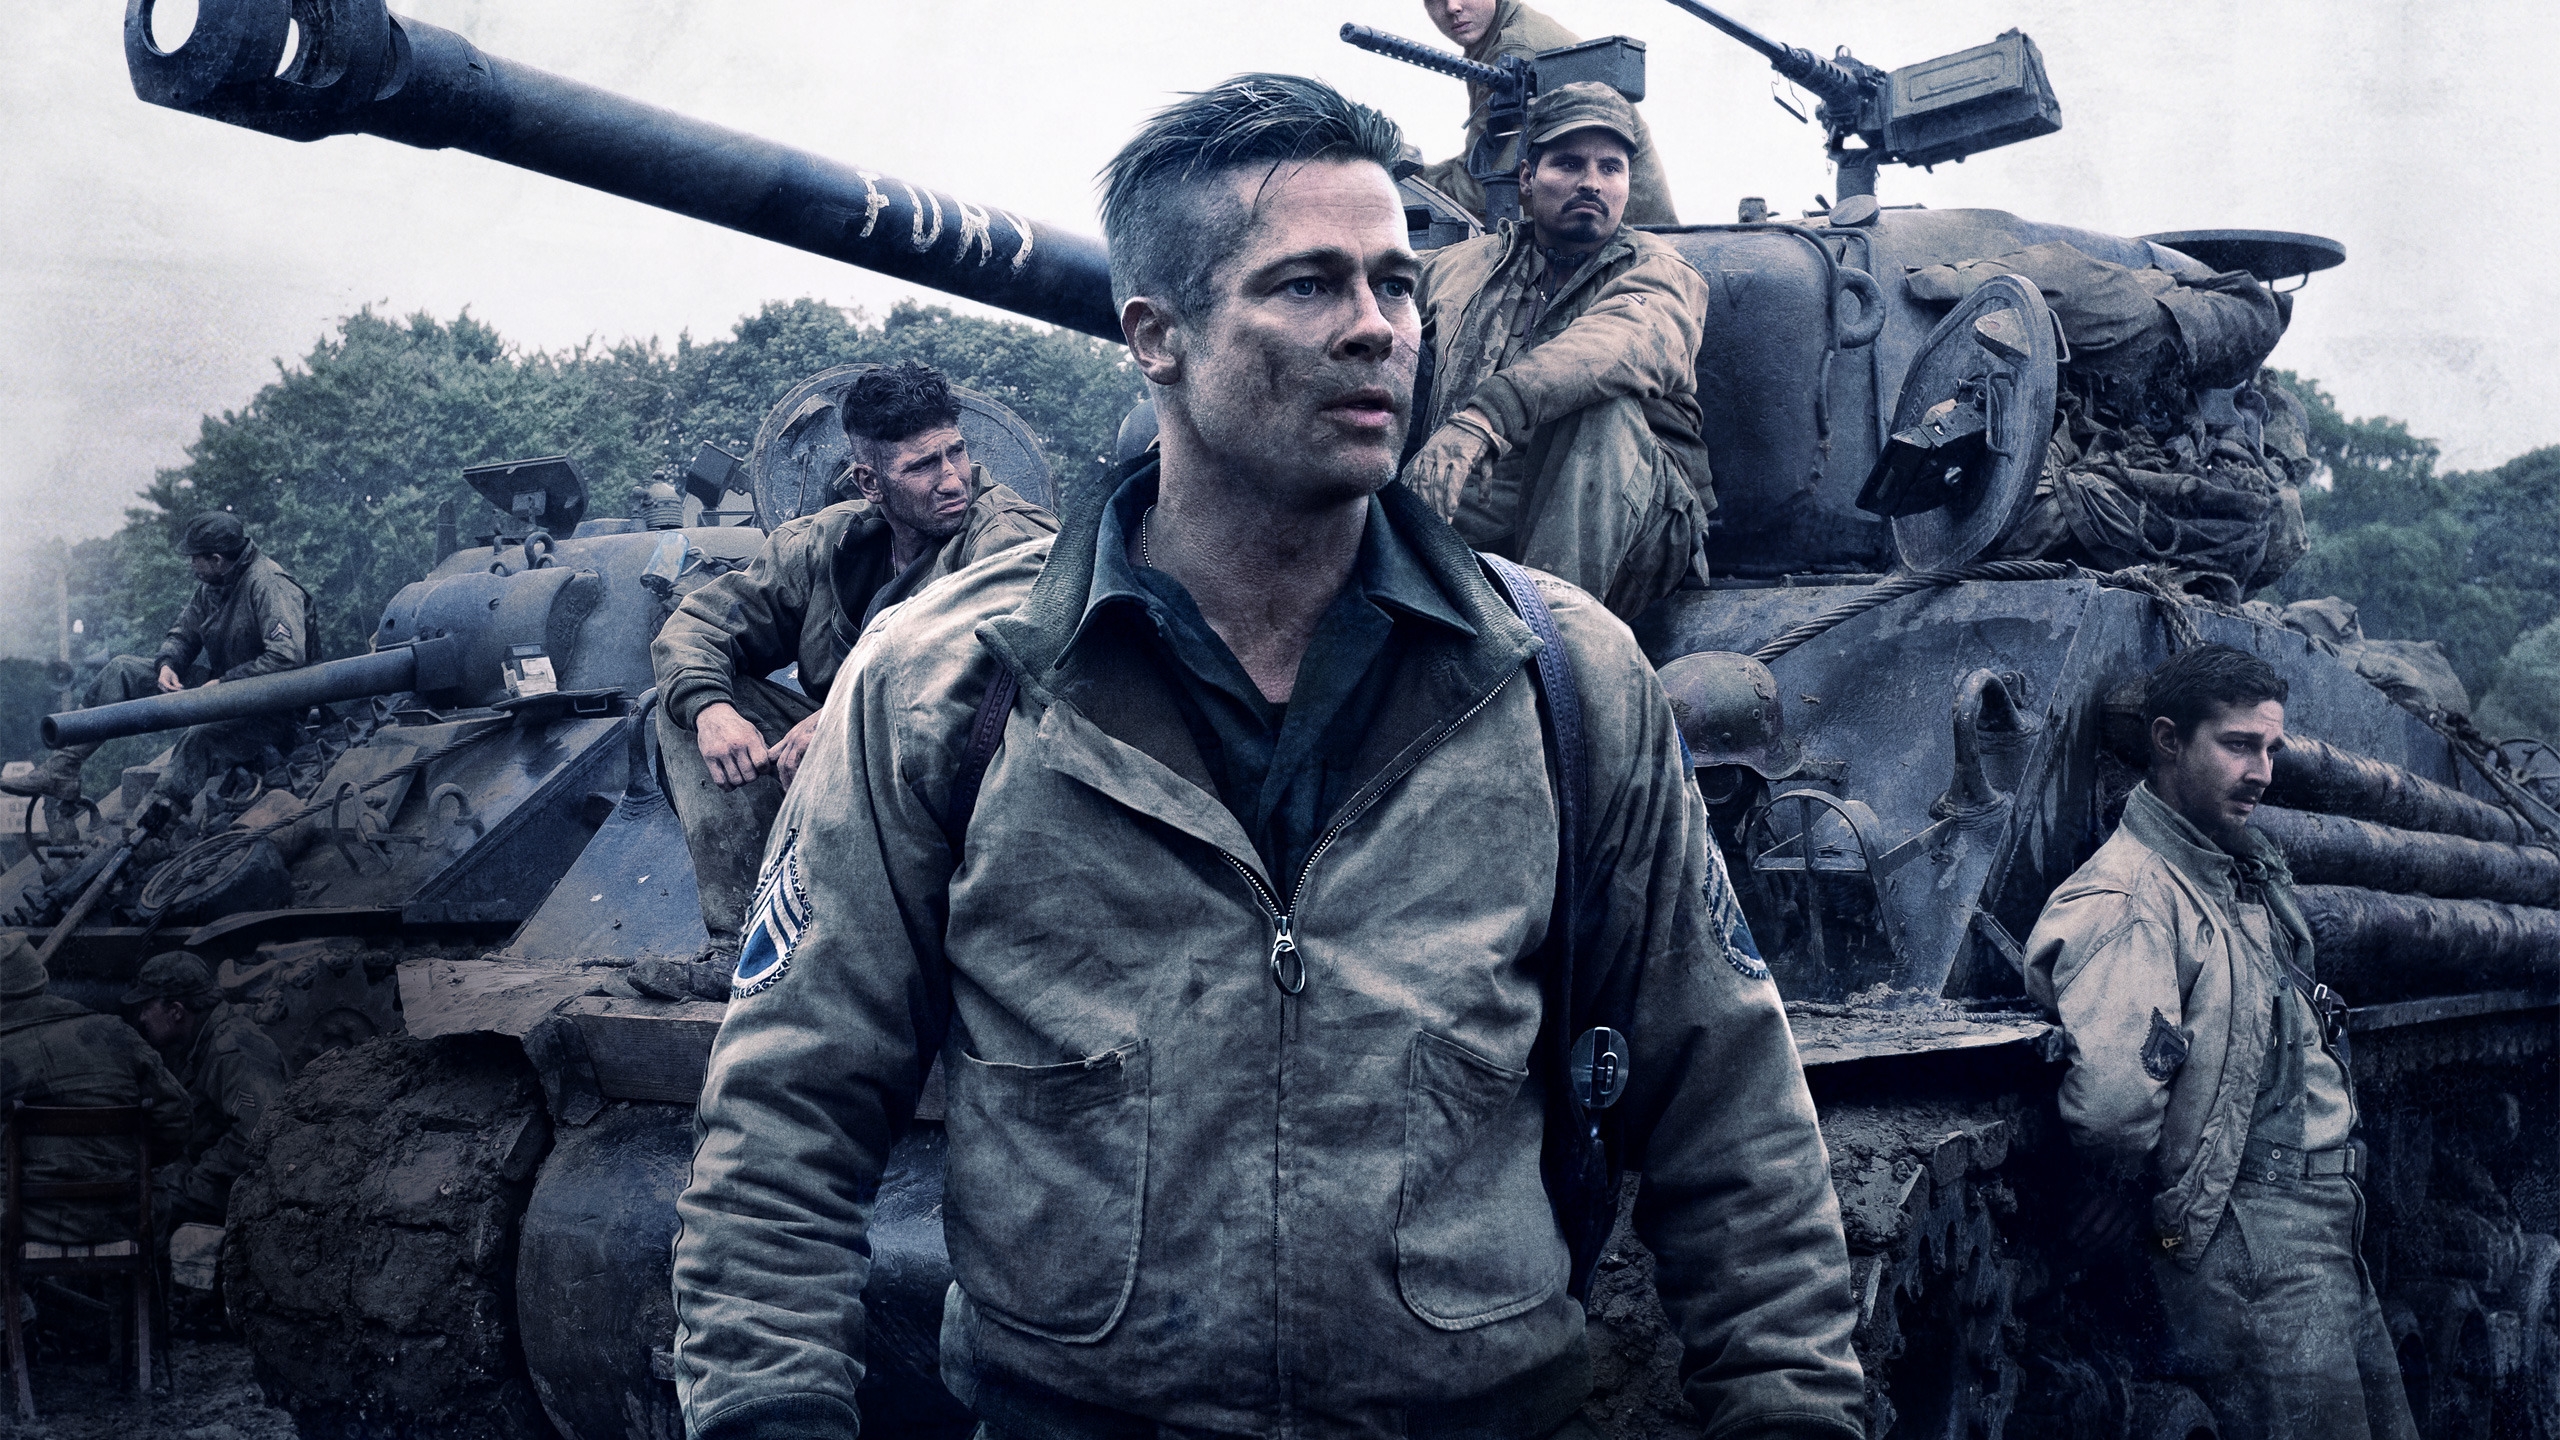 Fury Movie for 2560x1440 HDTV resolution